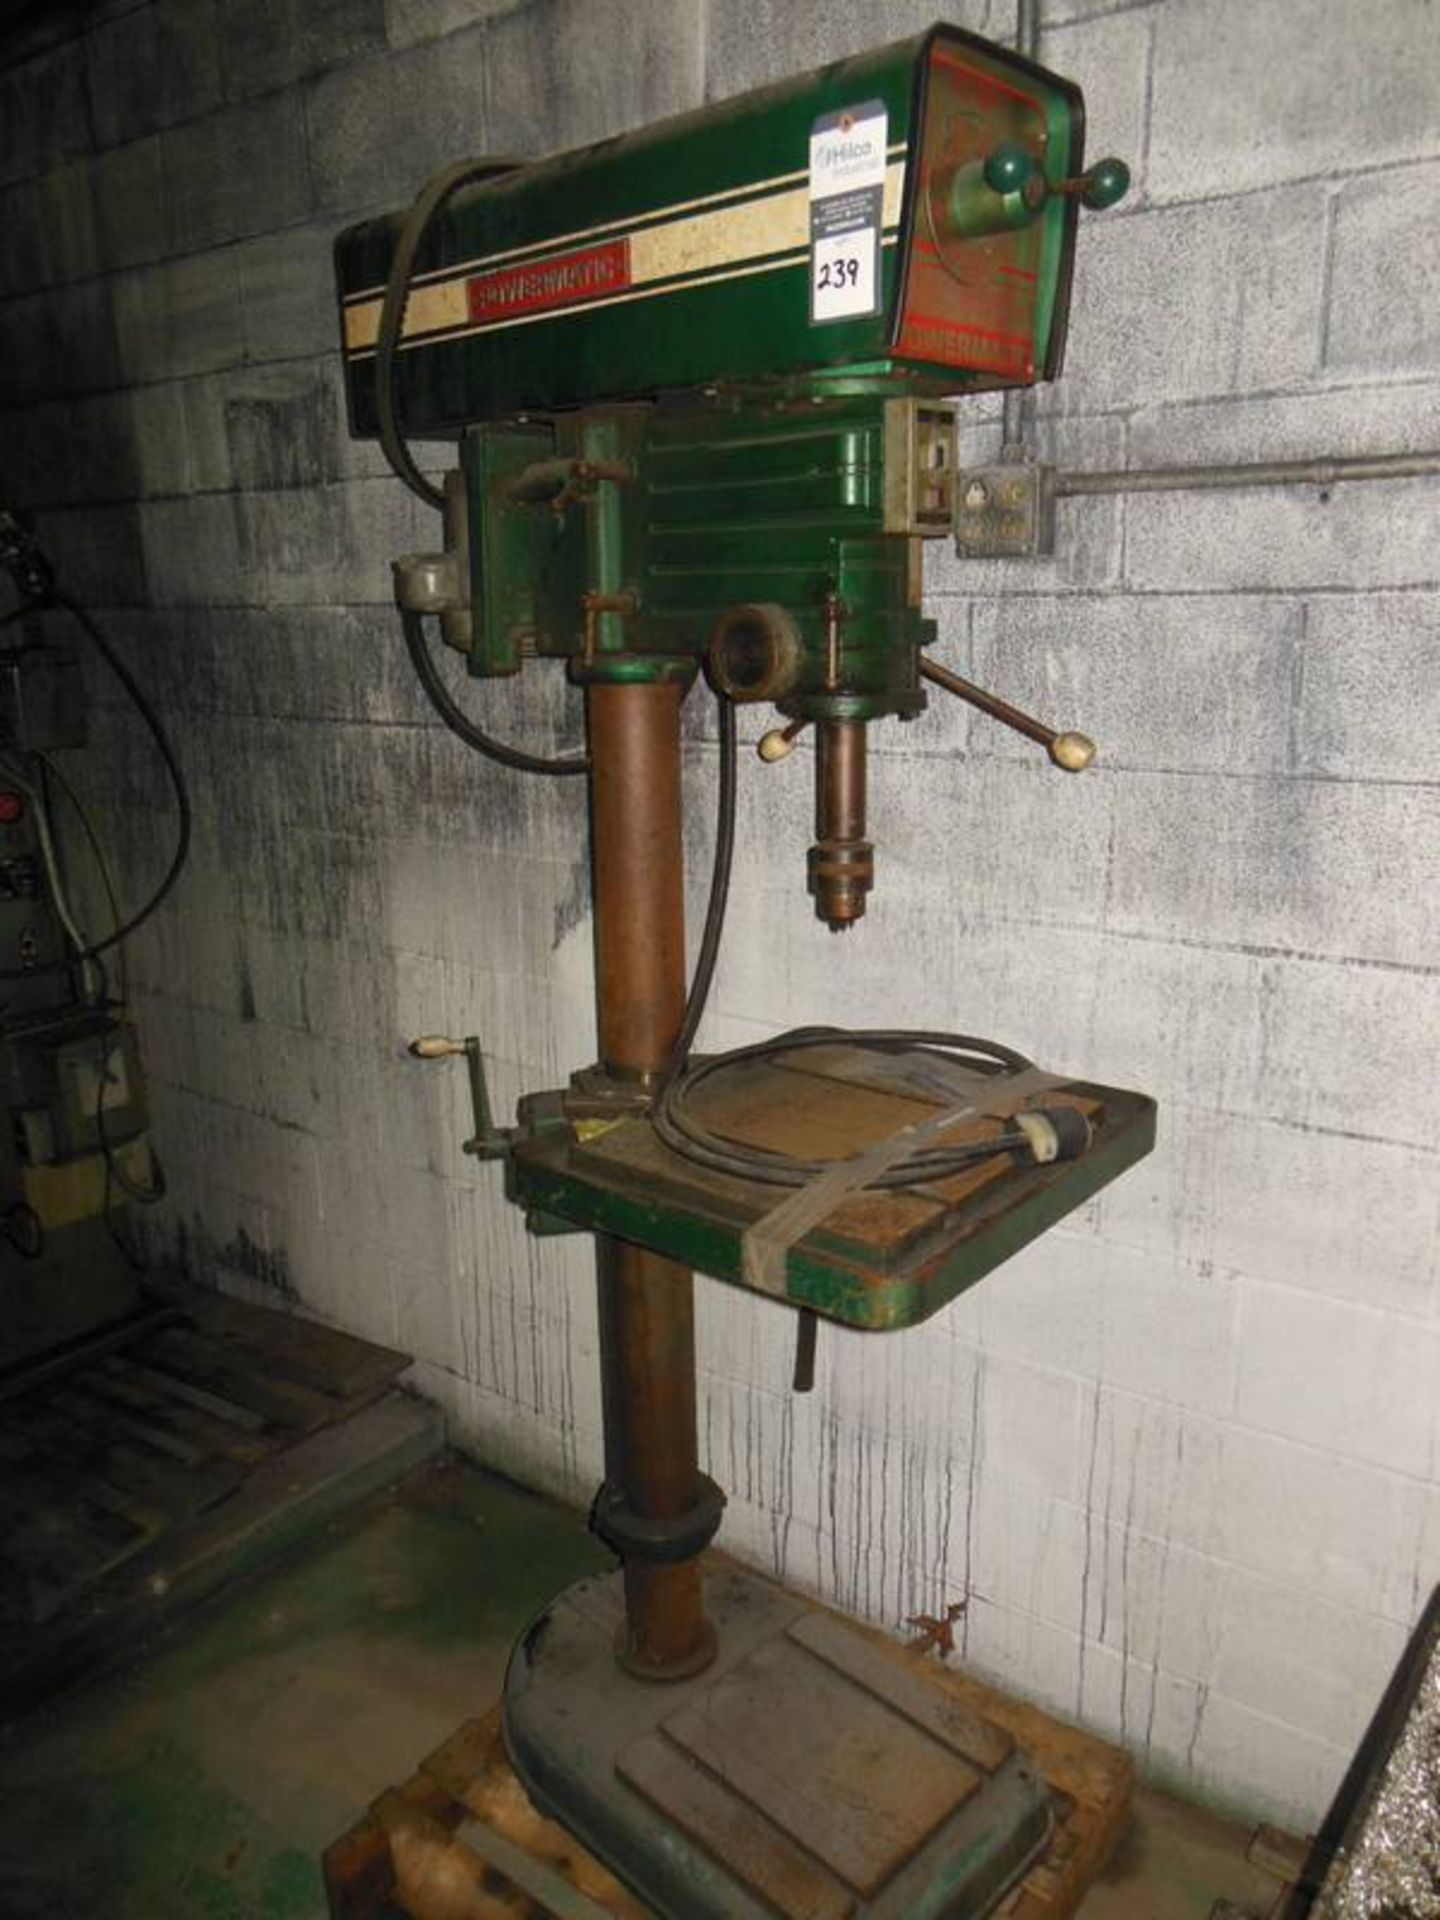 Powermatic Model 1200 Pedestal Drill; Serial Number: 320V666; with 100-1800 rpm (Bay 3)  Location: